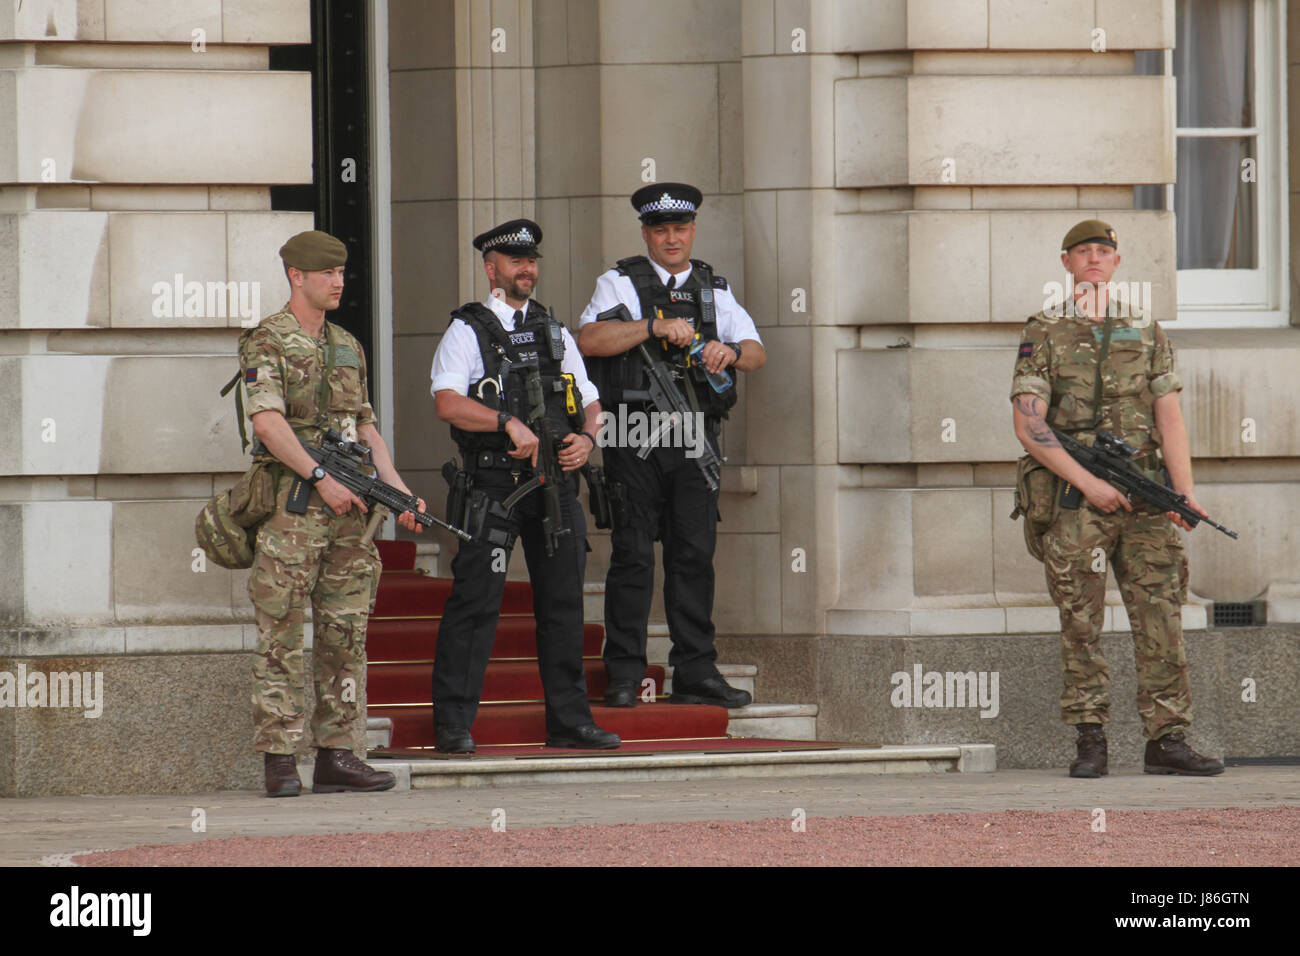 London, UK. 27th May, 2017. Soldiers and police officers carrying rifles on duty at Buckingham Palace after threat level was raised to critical, following the May 22nd Manchester Arena attack. About 1,000 armed military personnel were deployed to guarding national landmarks across the country. Credit: David Mbiyu/Alamy Live News Stock Photo